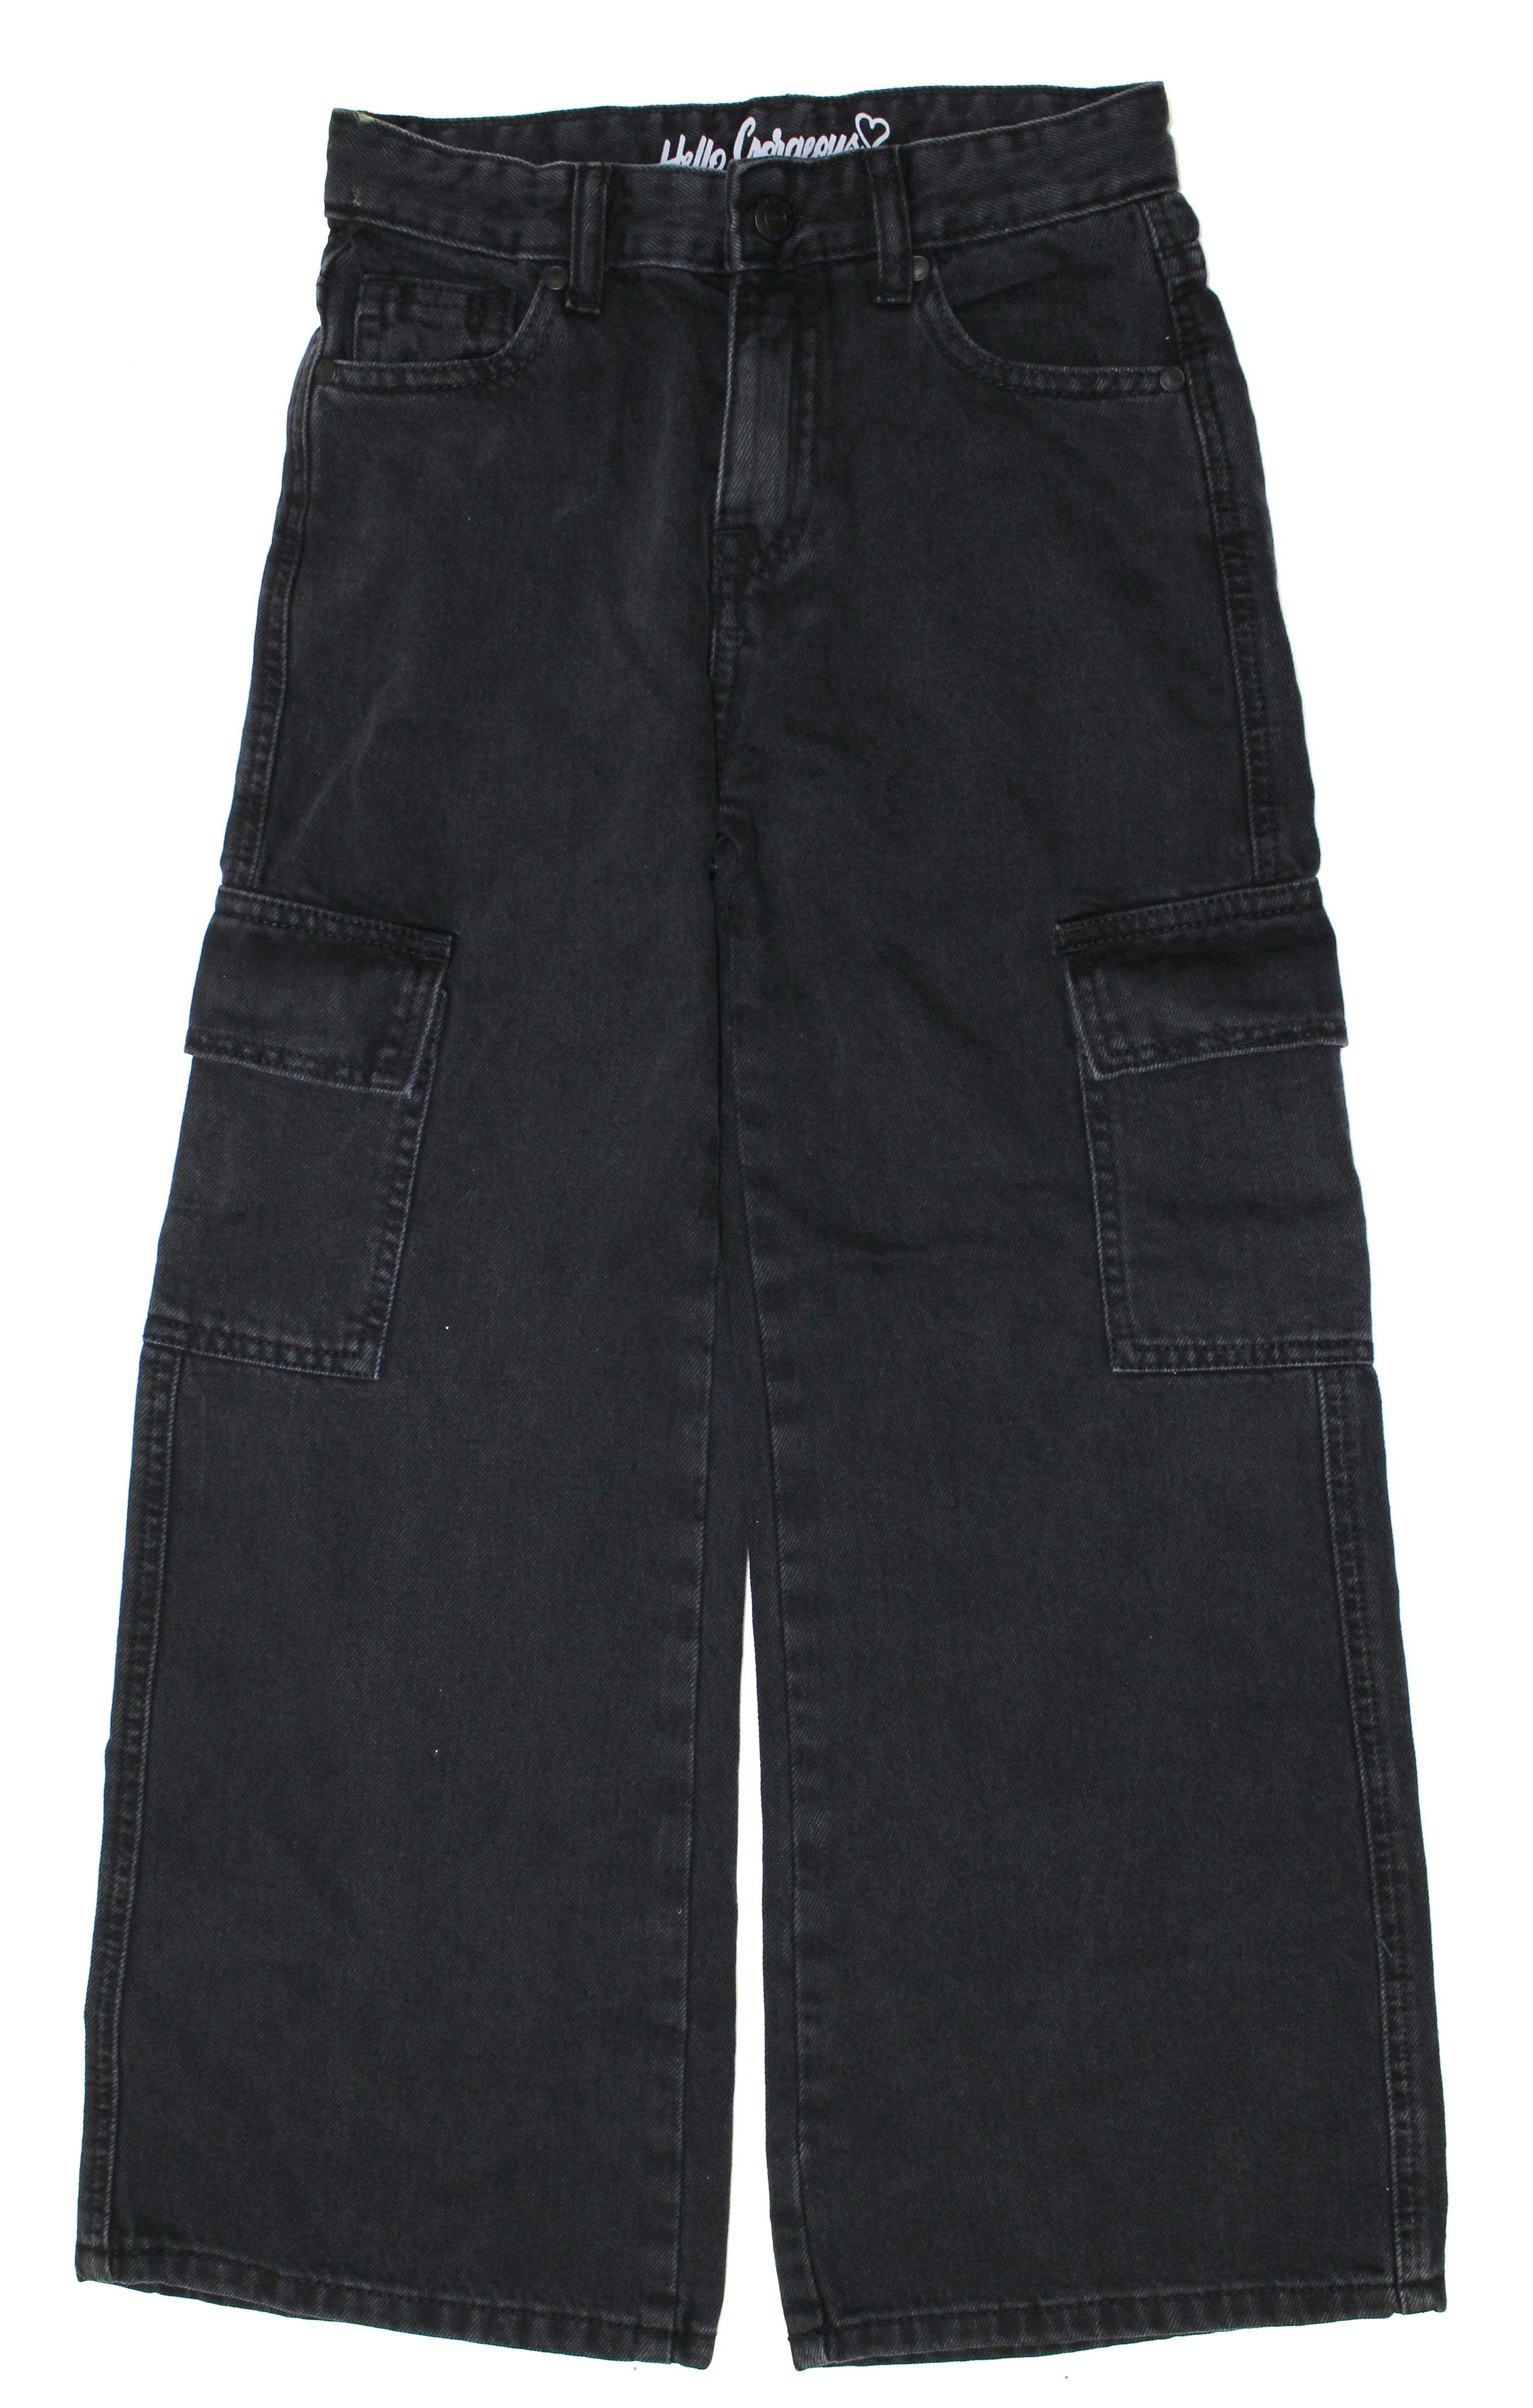 Cargojeans OAKS HEARTS" washed "THREE Black 387 (1-tlg) Jeans M330204 THREE Cargo Mädchen